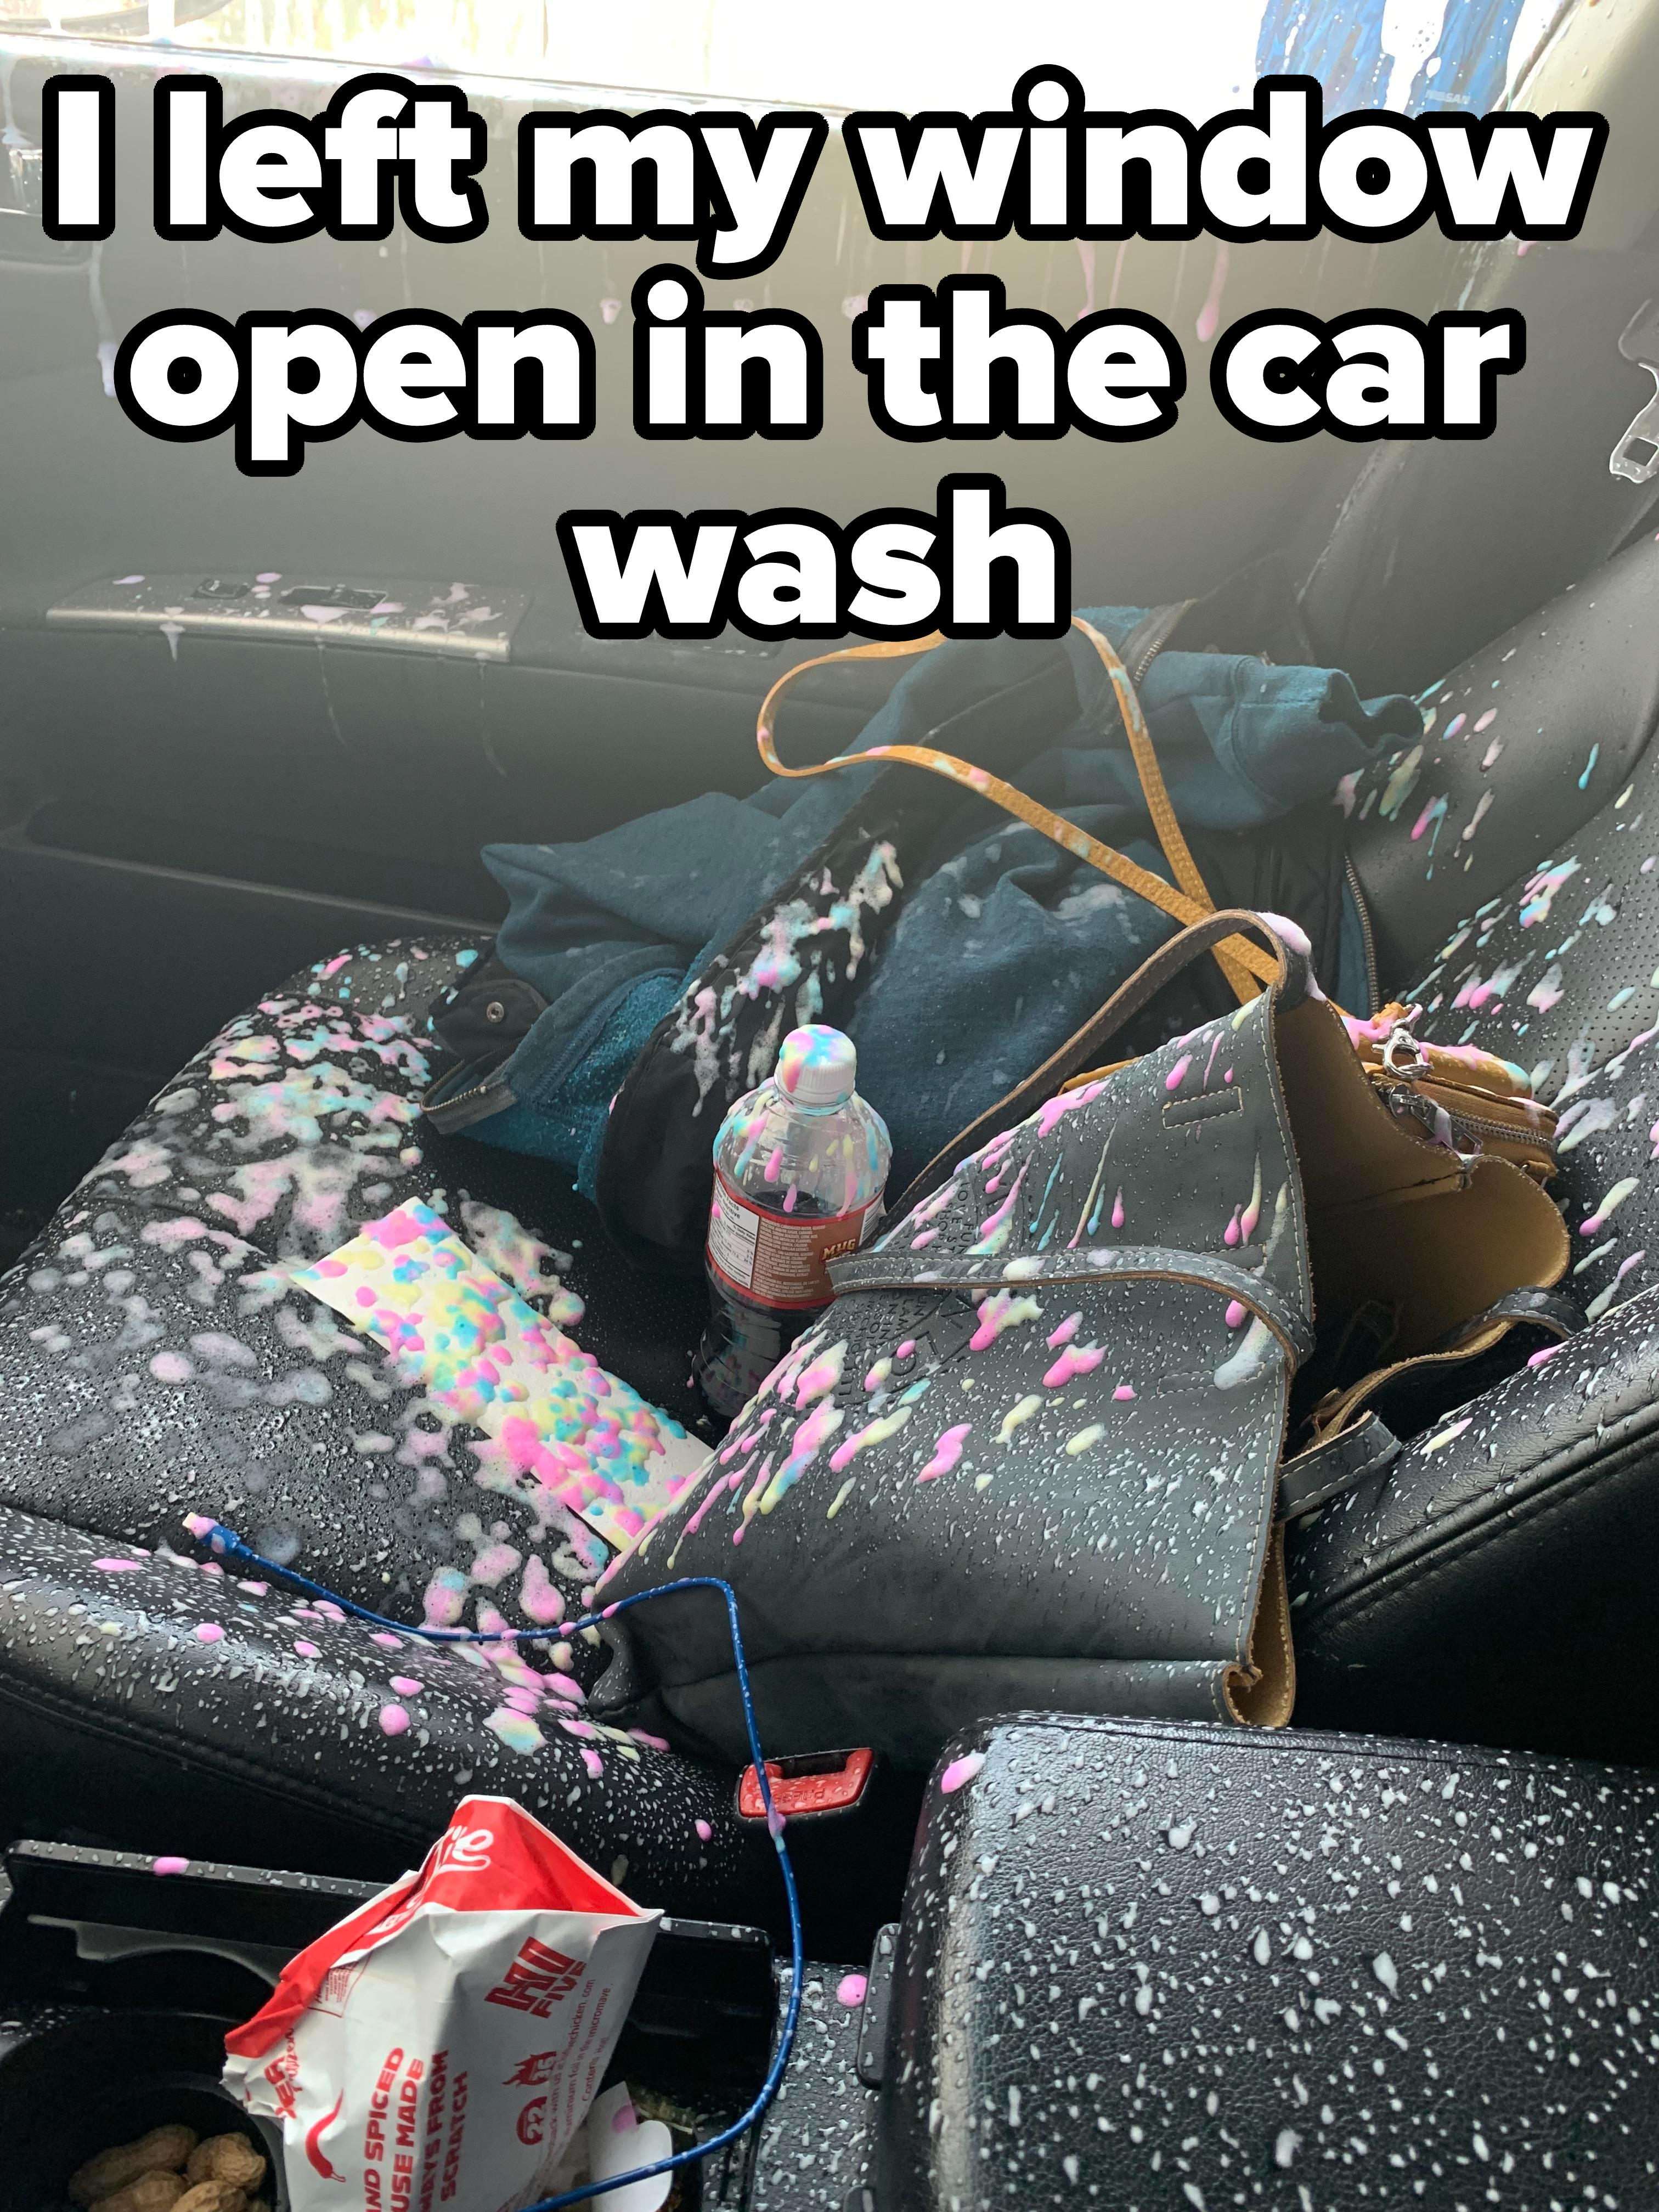 &quot;I left my window open in the car wash,&quot; showing the car interior with multicolored splotches on the seats